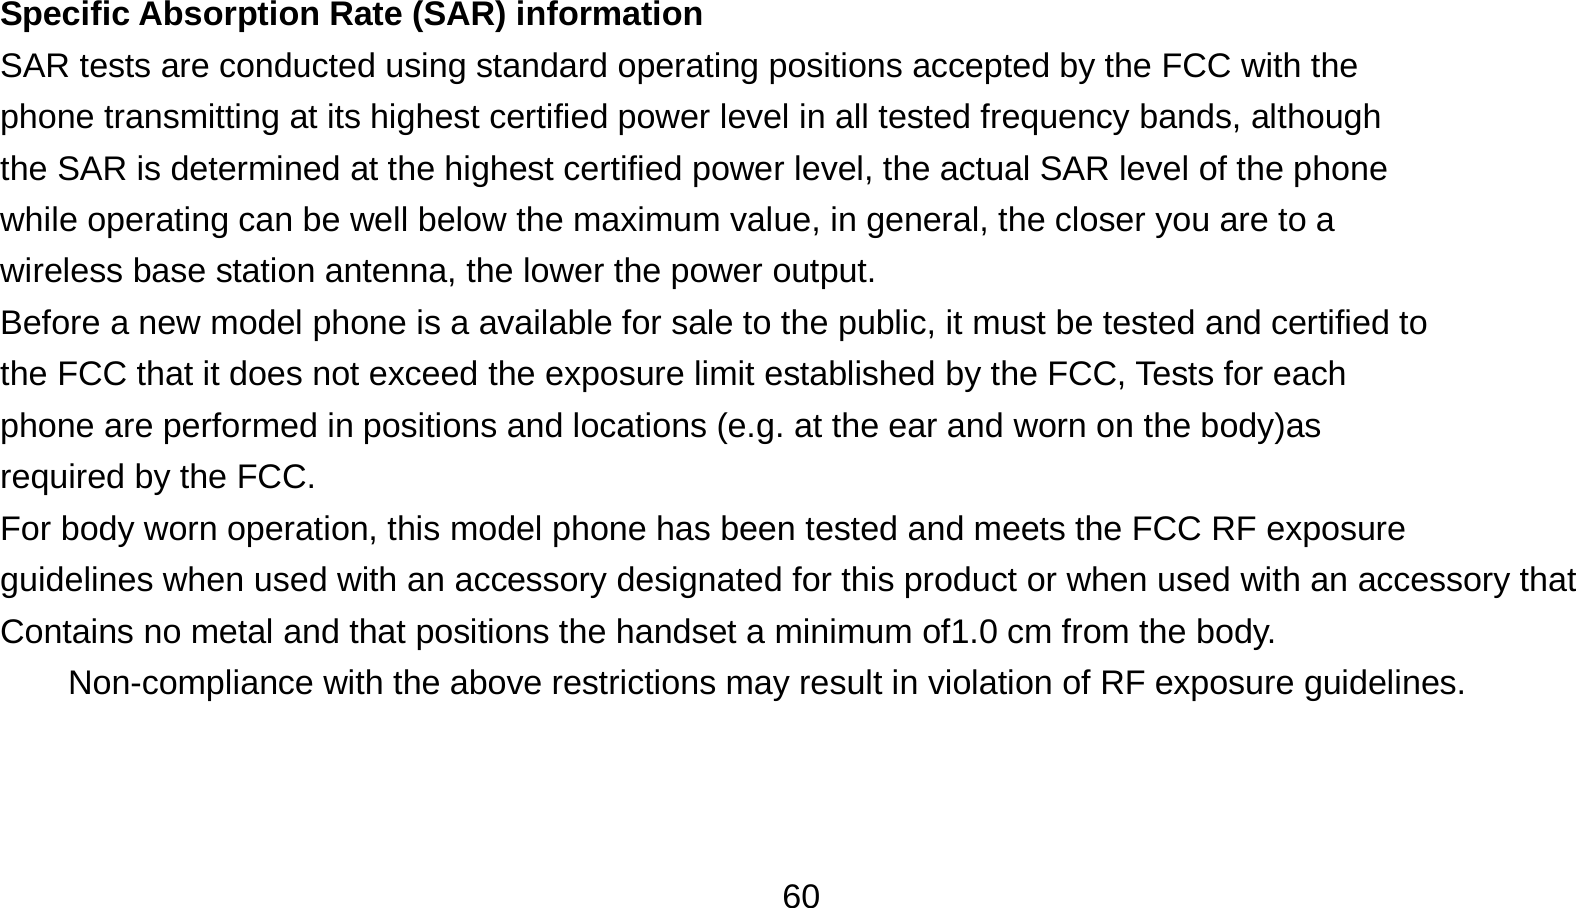   60 Specific Absorption Rate (SAR) information SAR tests are conducted using standard operating positions accepted by the FCC with the phone transmitting at its highest certified power level in all tested frequency bands, although the SAR is determined at the highest certified power level, the actual SAR level of the phone while operating can be well below the maximum value, in general, the closer you are to a wireless base station antenna, the lower the power output. Before a new model phone is a available for sale to the public, it must be tested and certified to the FCC that it does not exceed the exposure limit established by the FCC, Tests for each phone are performed in positions and locations (e.g. at the ear and worn on the body)as required by the FCC. For body worn operation, this model phone has been tested and meets the FCC RF exposure guidelines when used with an accessory designated for this product or when used with an accessory that Contains no metal and that positions the handset a minimum of1.0 cm from the body. Non-compliance with the above restrictions may result in violation of RF exposure guidelines.  